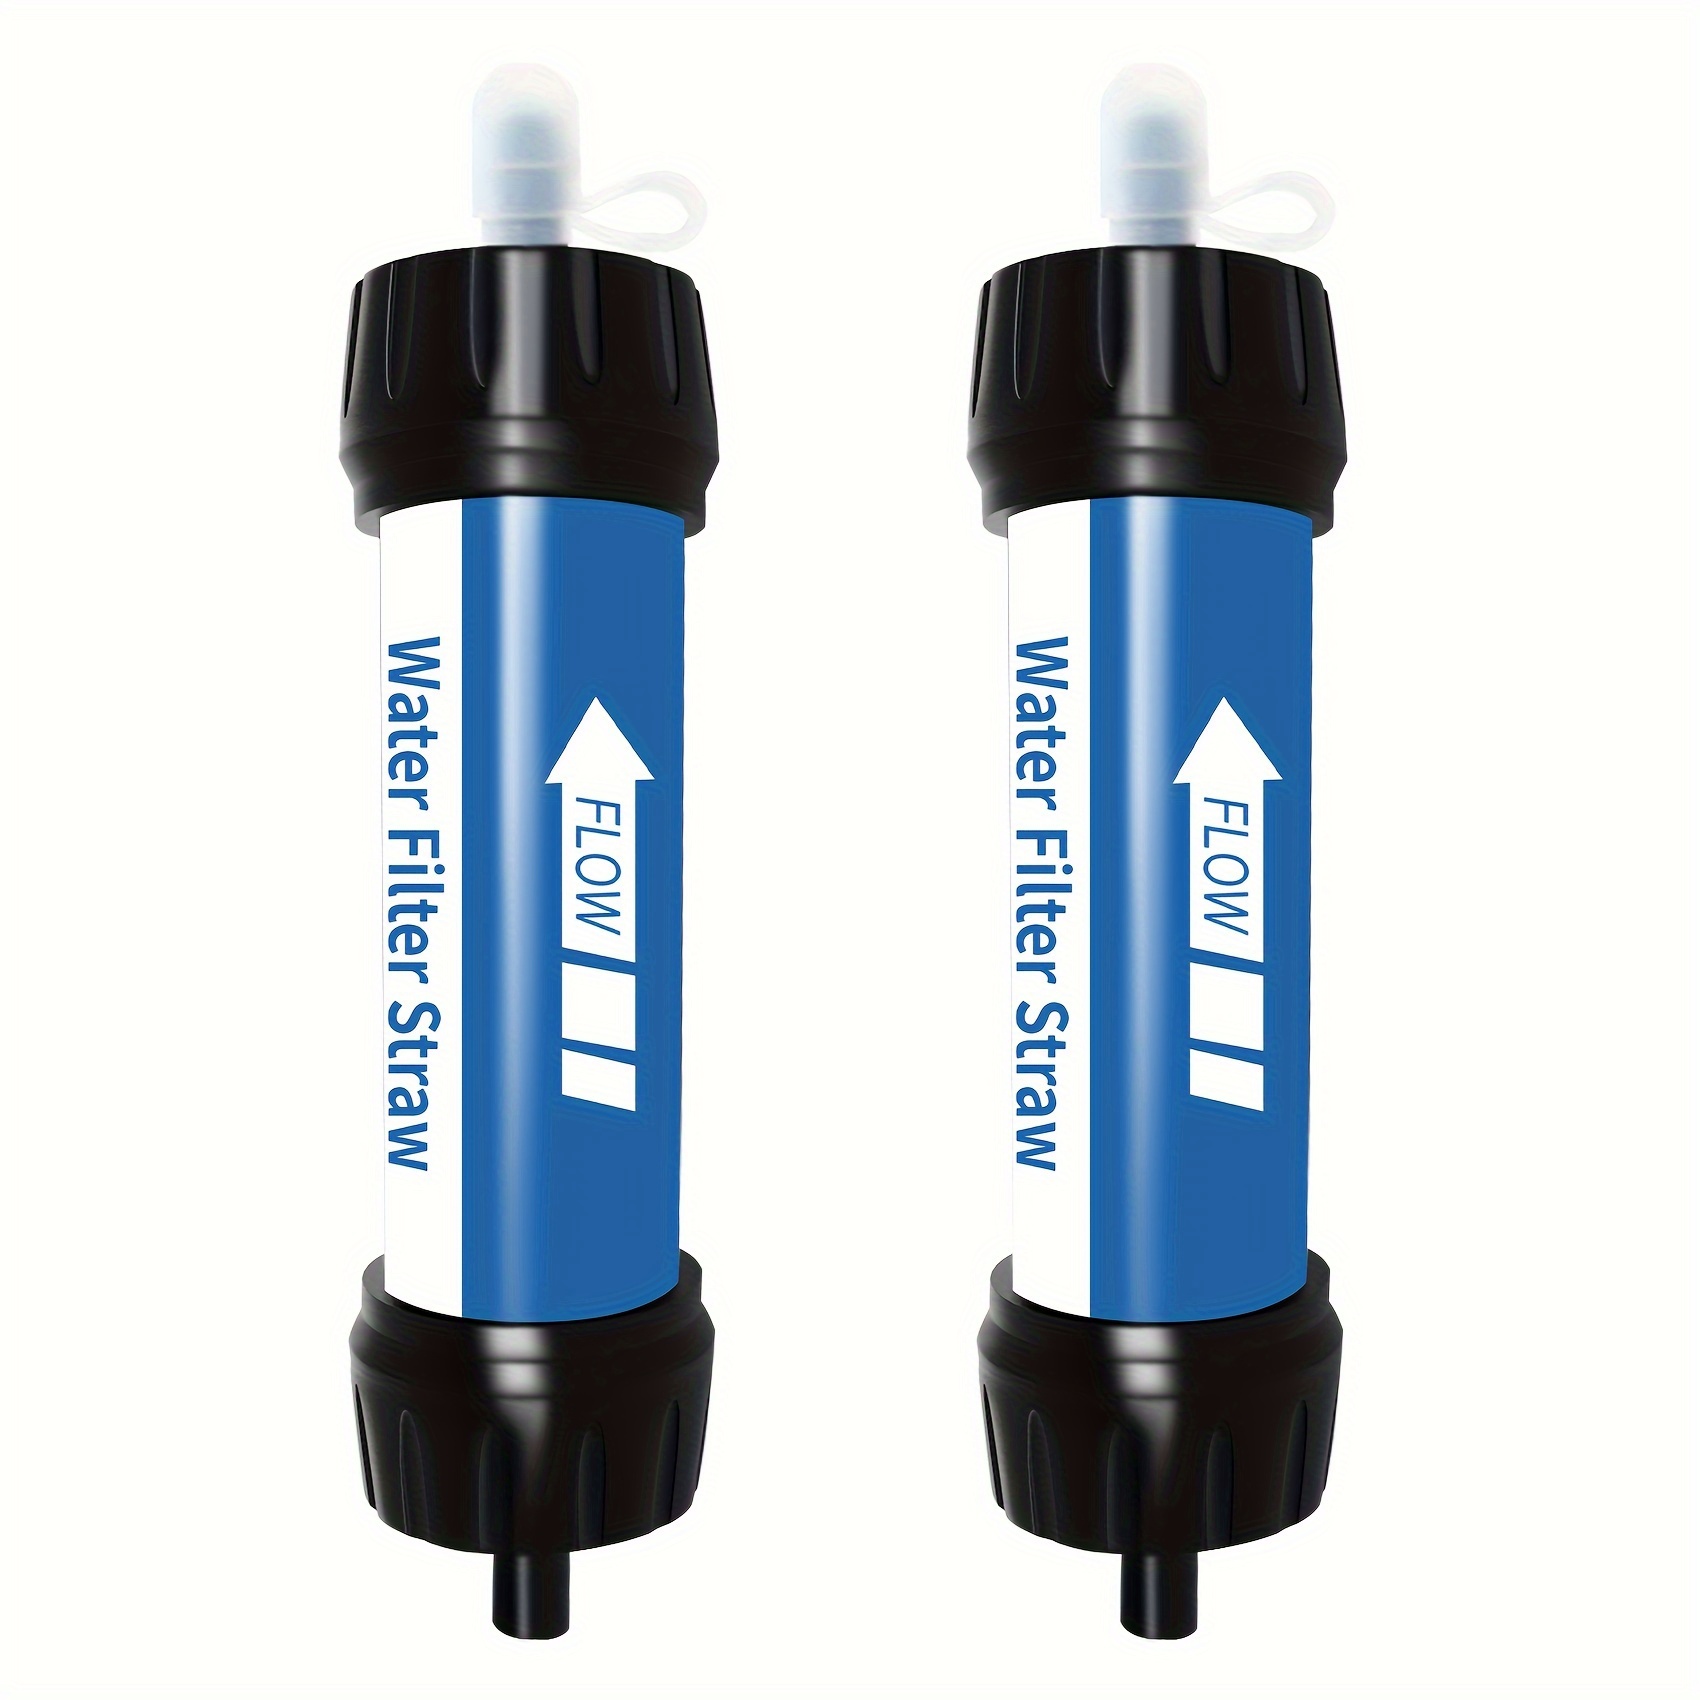 

2pcs/4pcs Personal Water Filter Straws: Mini Water Purifiers For Hiking, Camping, Travel & Emergency Preparedness